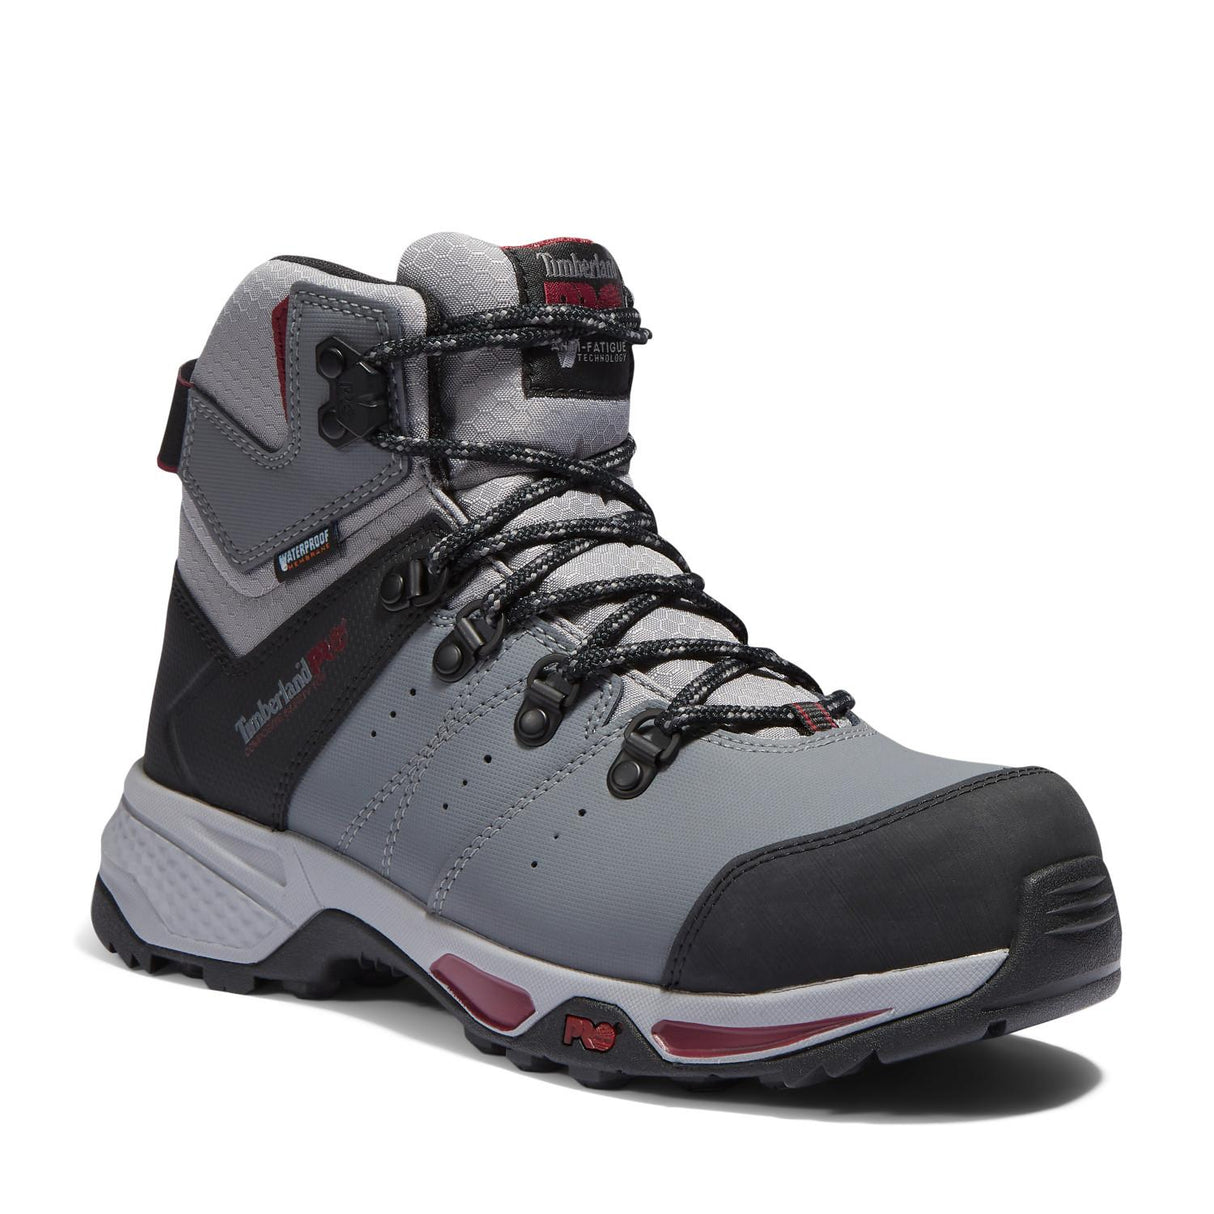 Timberland Pro-Women's Switchback Grey-Steel Toes-12